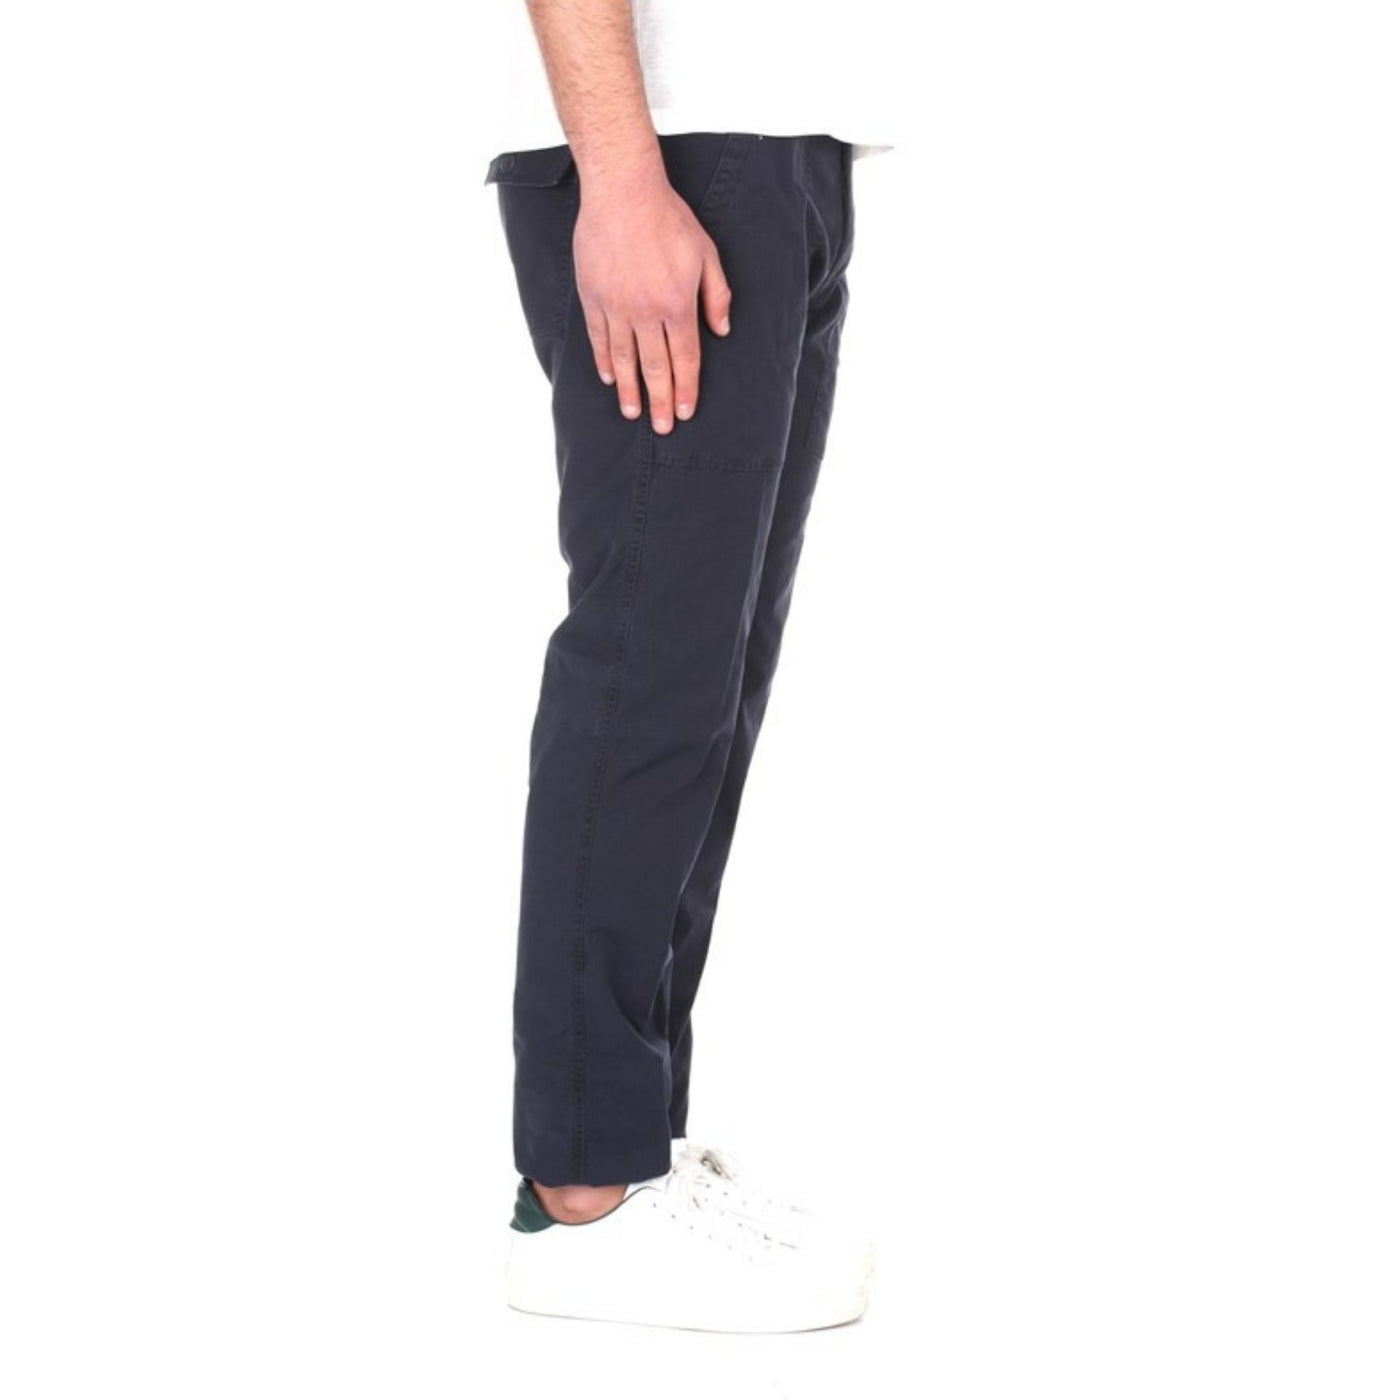 Men's trousers with solid color pockets